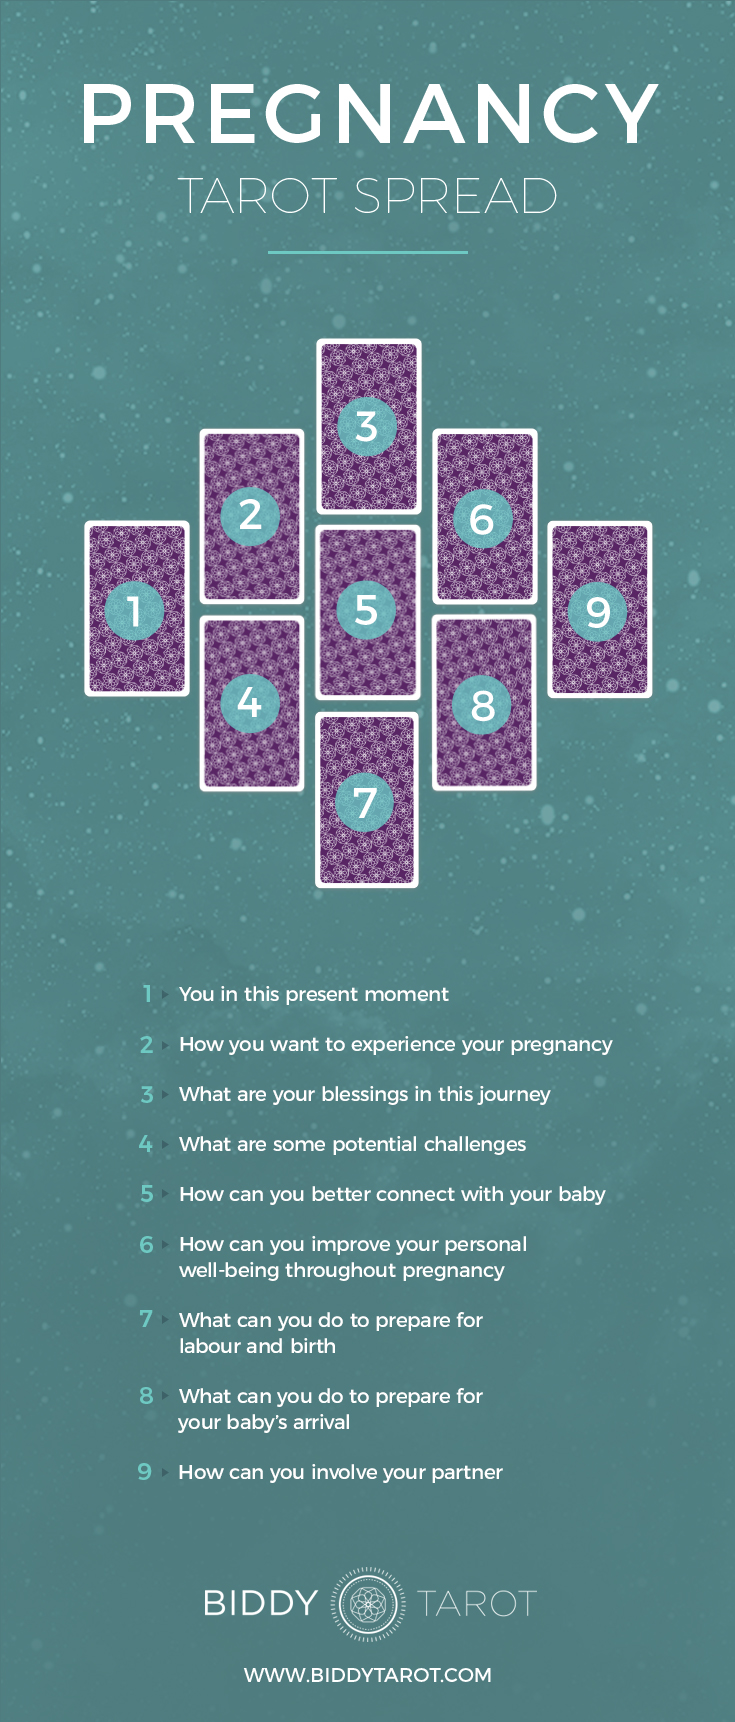 The Pregnancy Tarot Spread – Creating a positive experience for